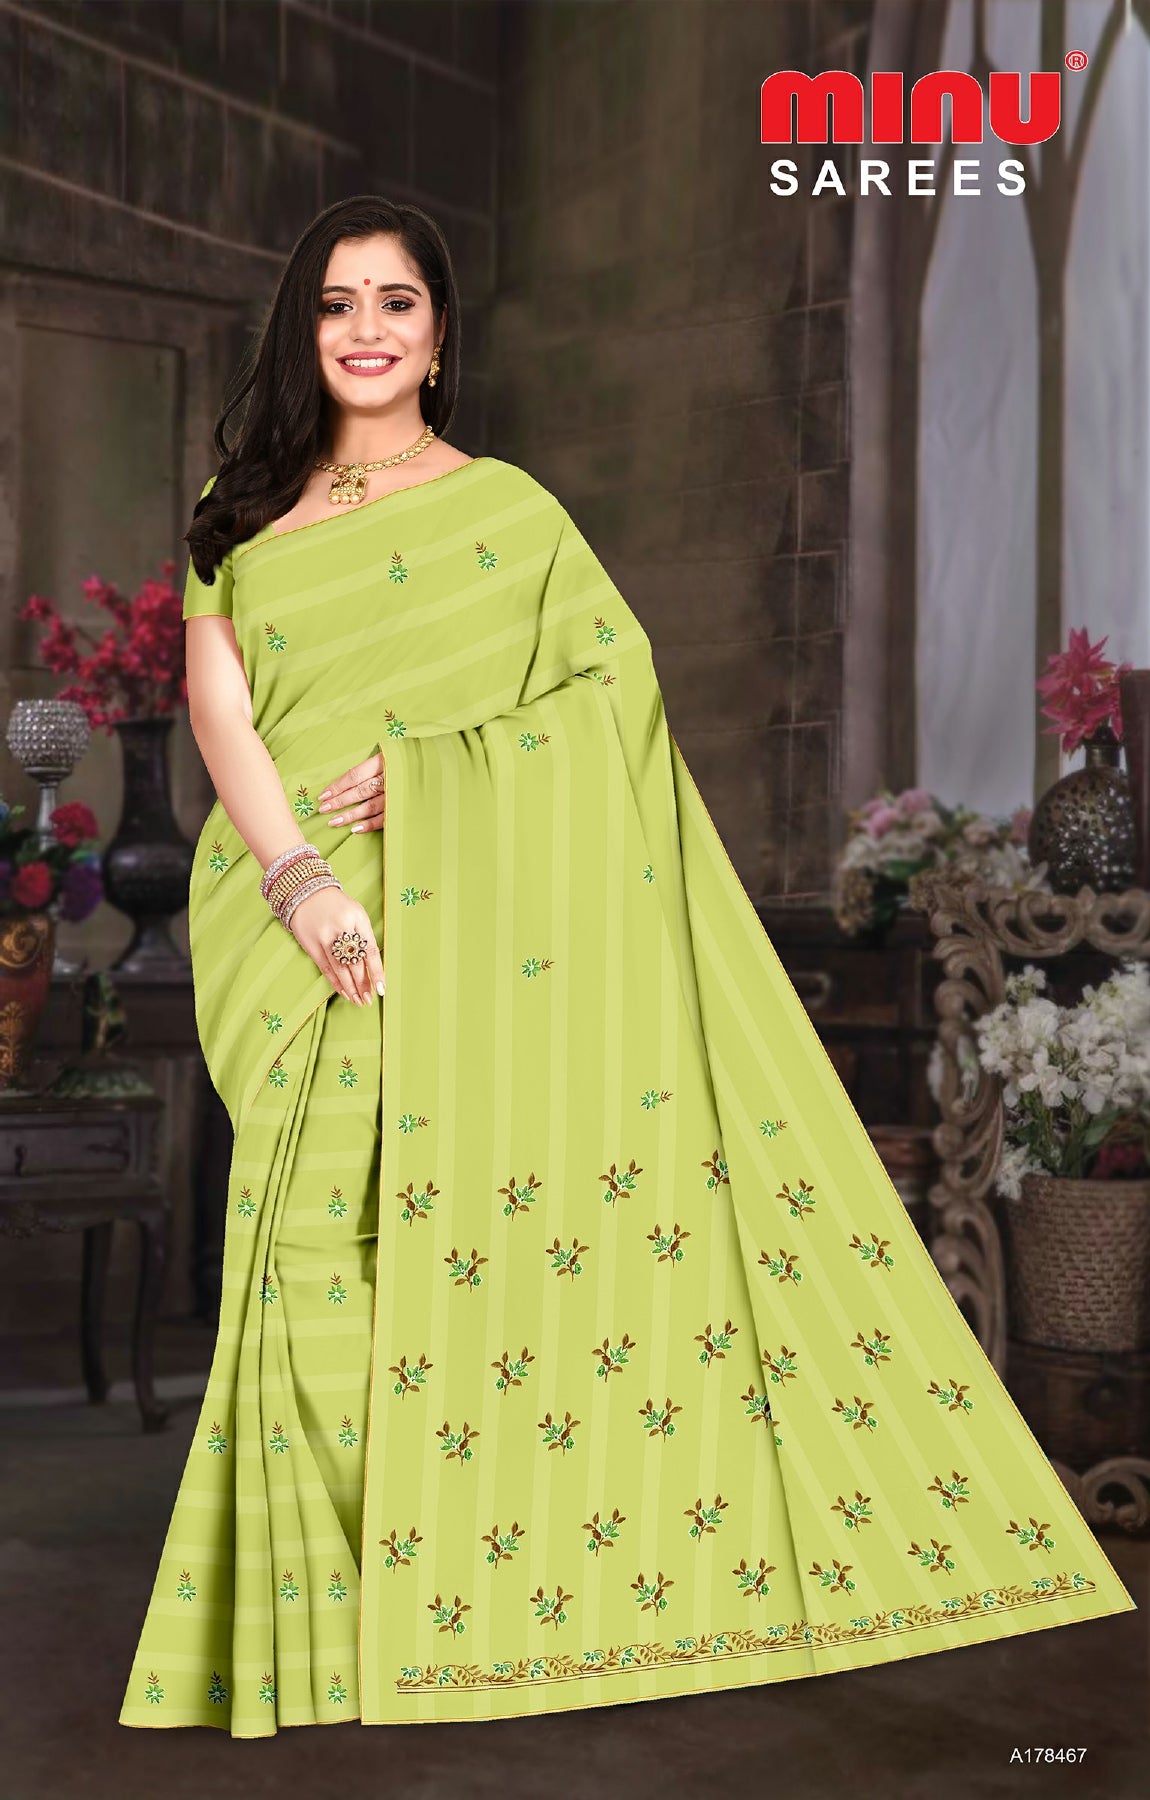 embroidery work sarees wholesale at low prices 